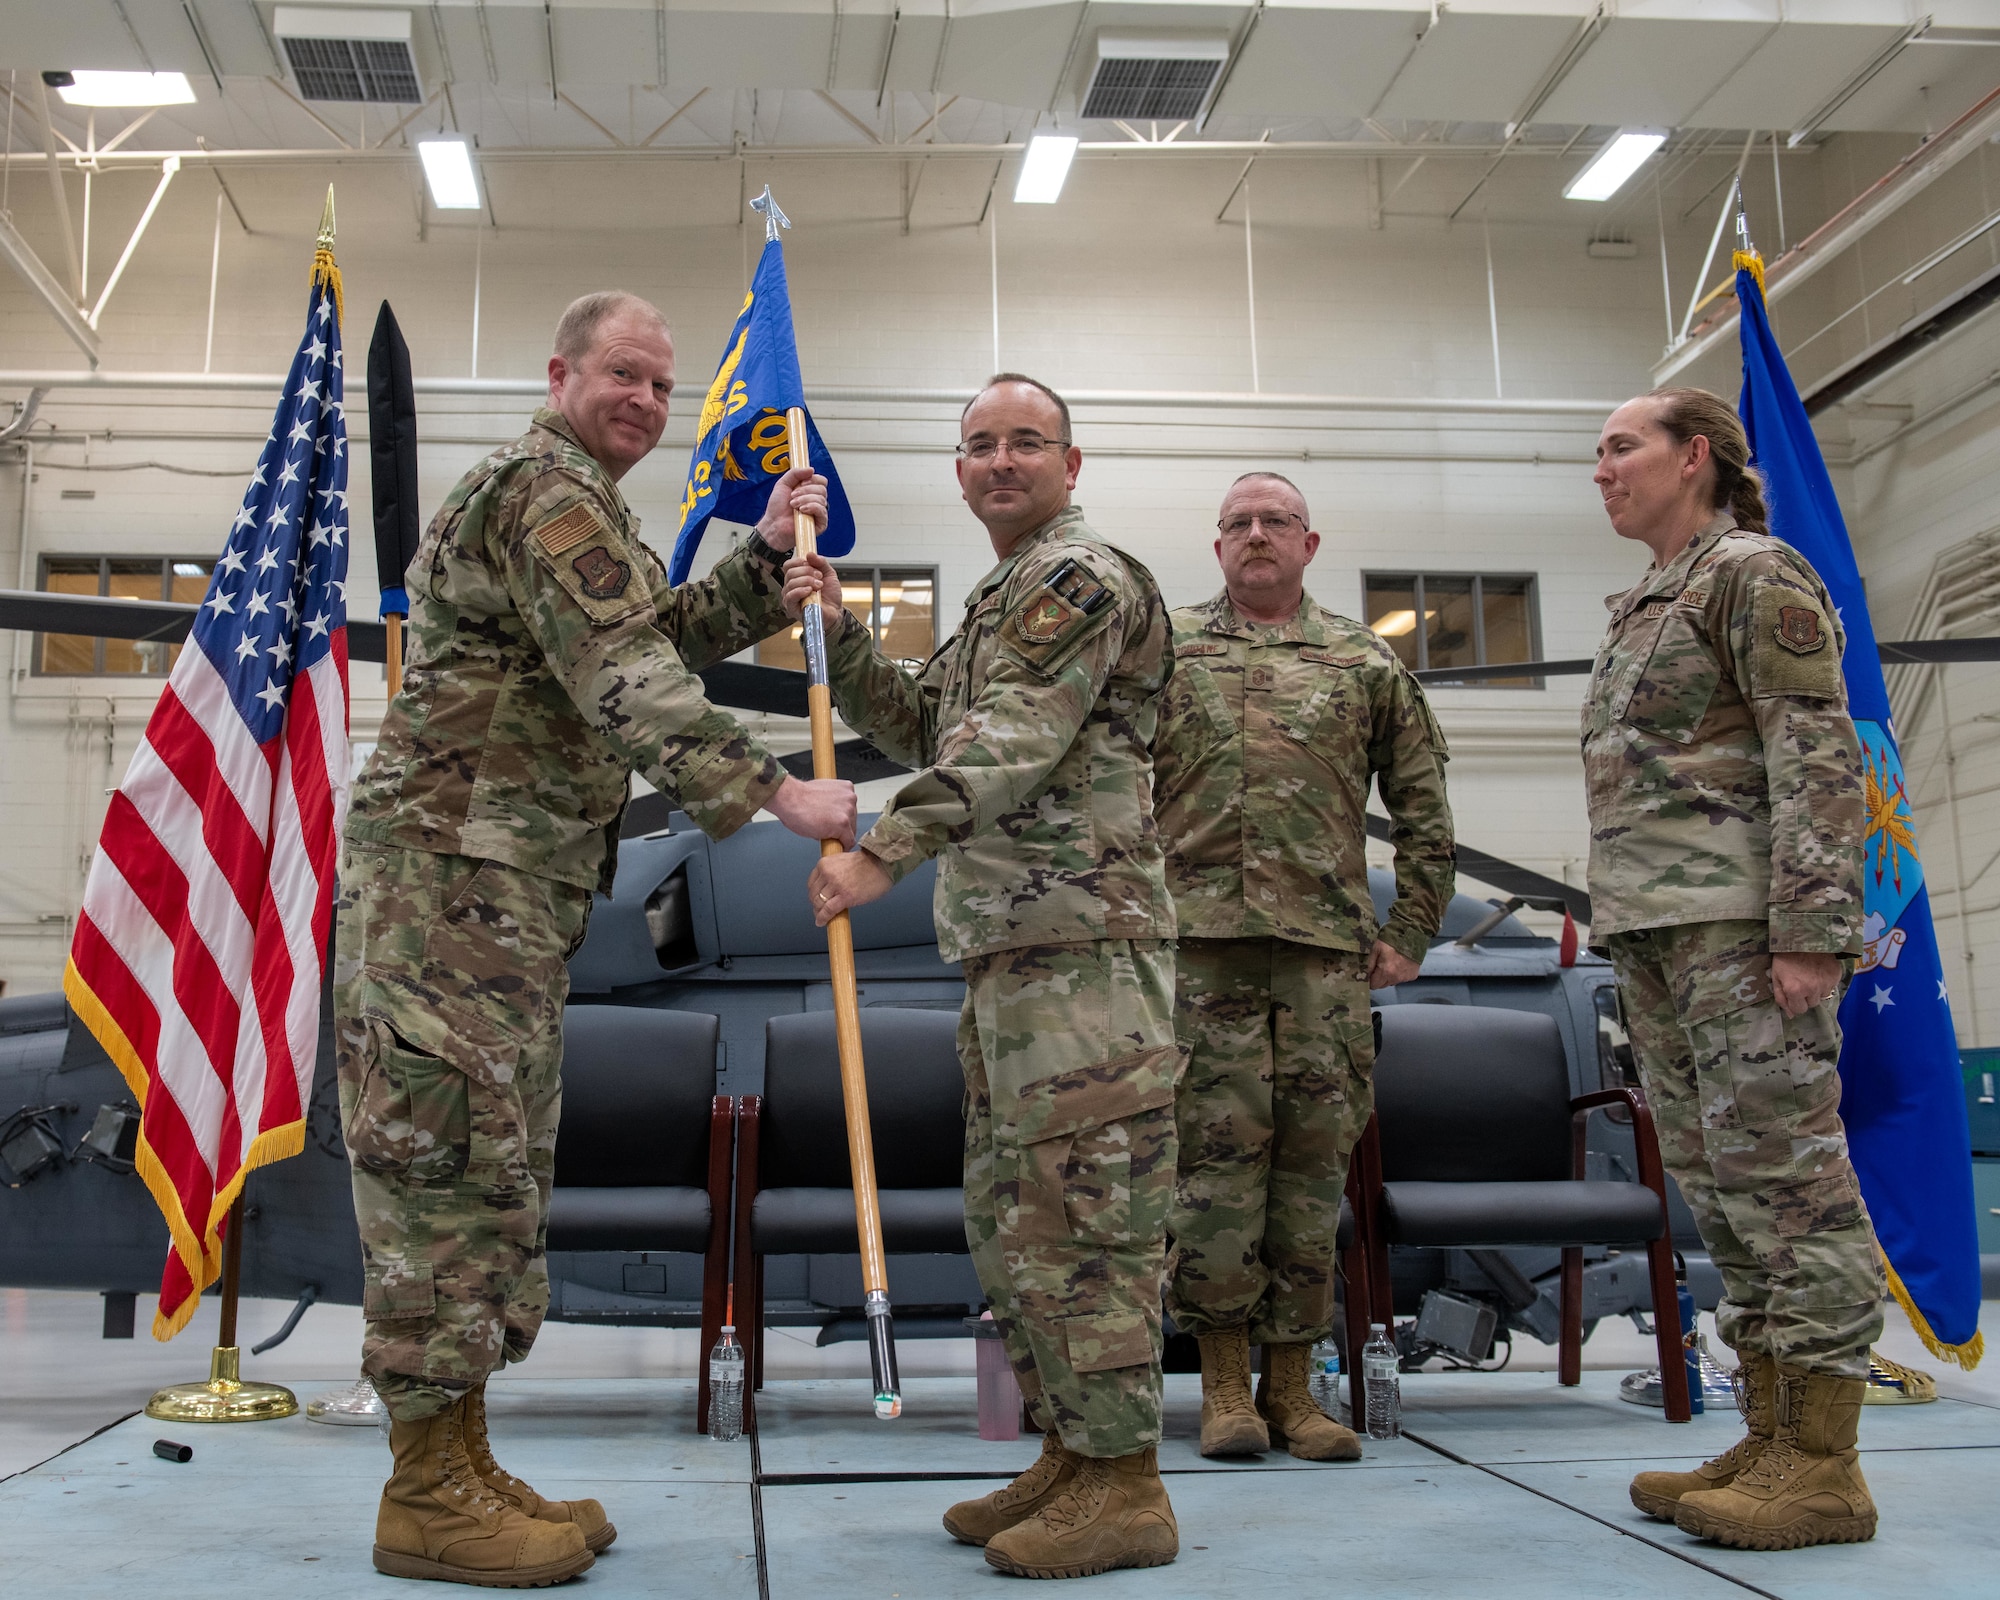 Lt. Col. Joseph Romeo, 943rd Security Forces commander, assumes command during a change of name ceremony at Davis-Monthan Air Force Base, Arizona, June 10, 2022. The 943rd SFS mission is to provide the most highly effective, cohesive, and disciplined security force defender professionals in the world. (U.S. Air Force photo by Senior Airman Nicole Koreen)